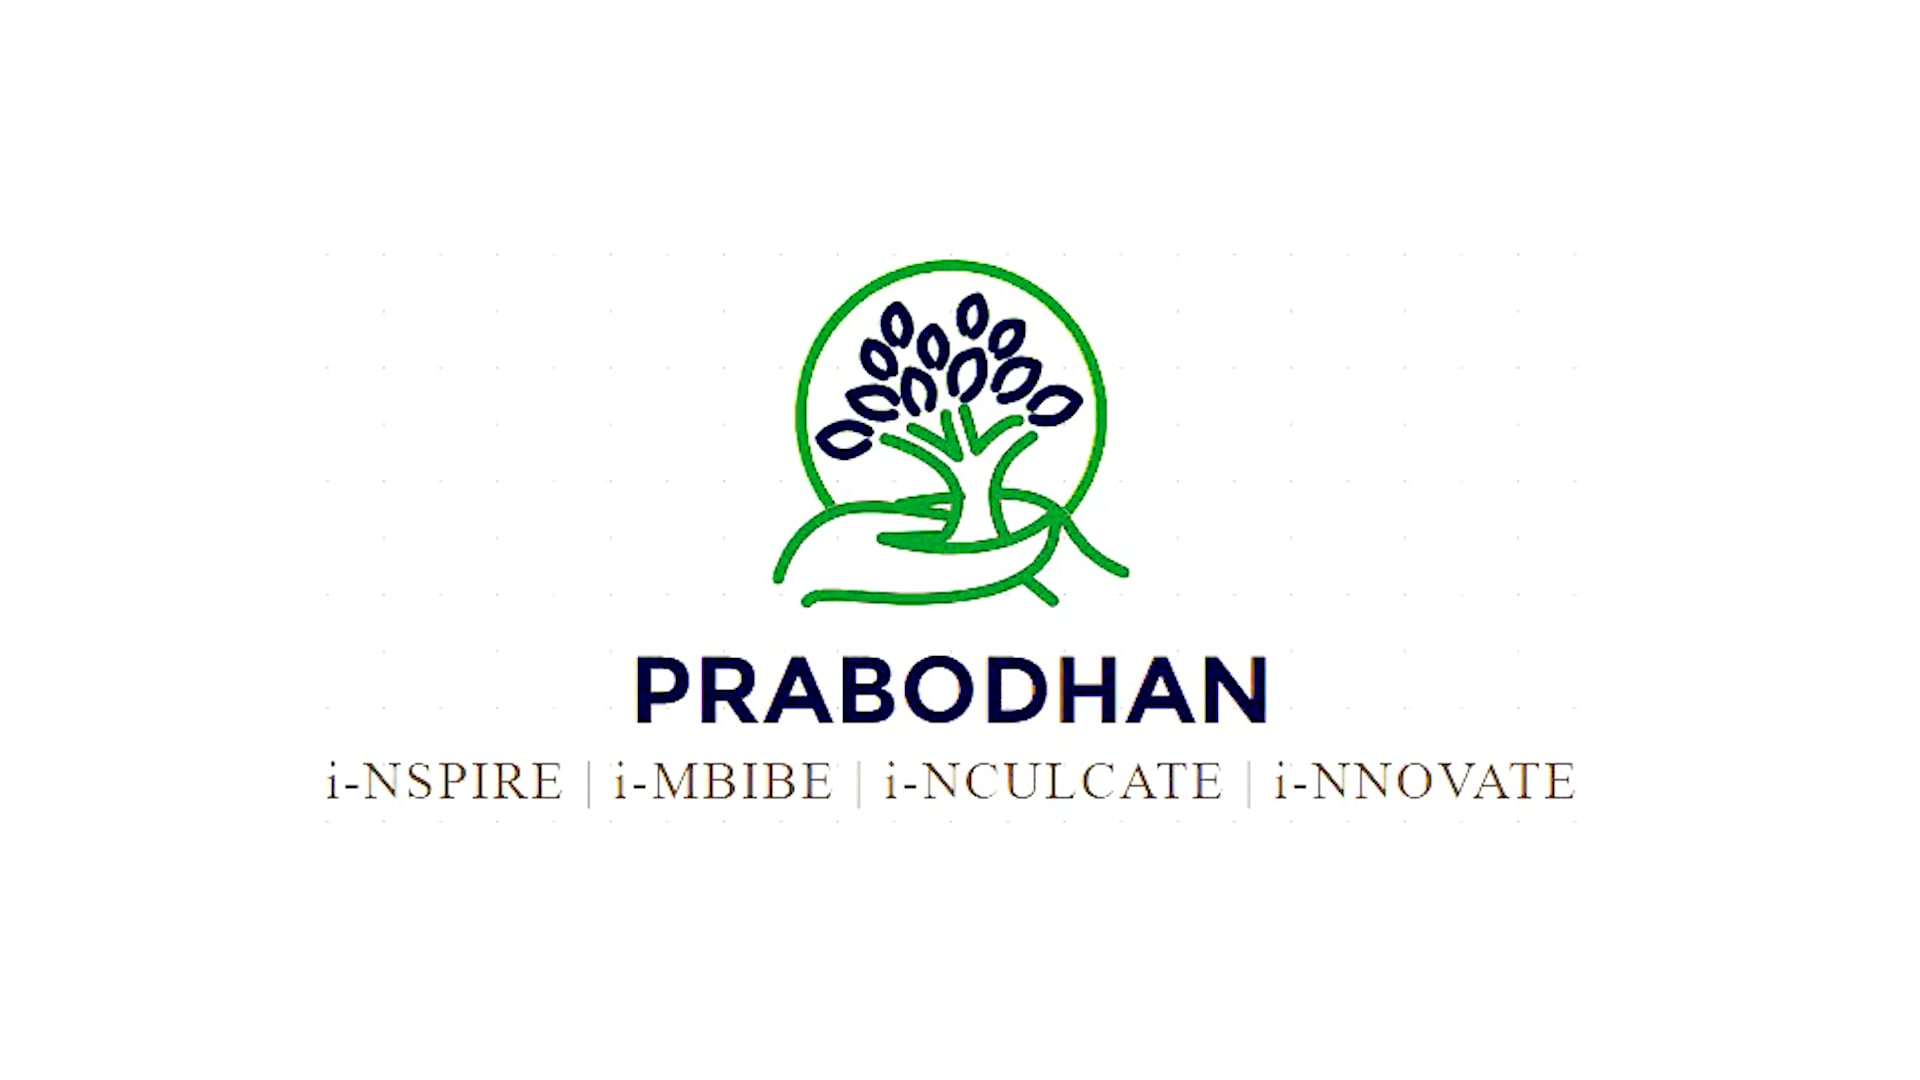 Prabodhan 2021 | The unveiling